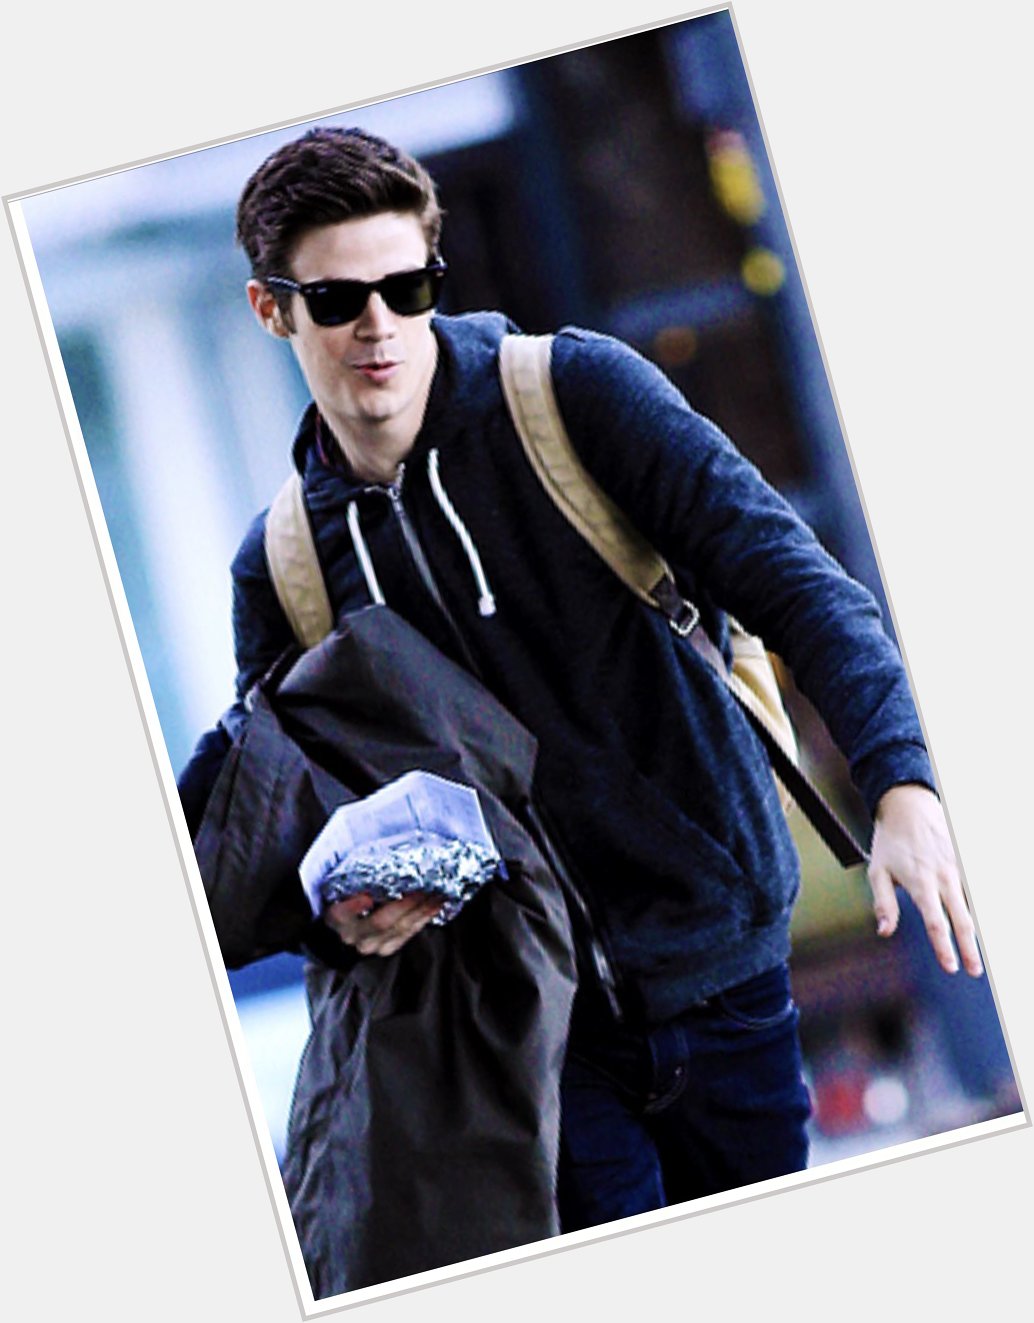 HAPPY BIRTHDAY TO OUR BABE GRANT GUSTIN!!!!!!        